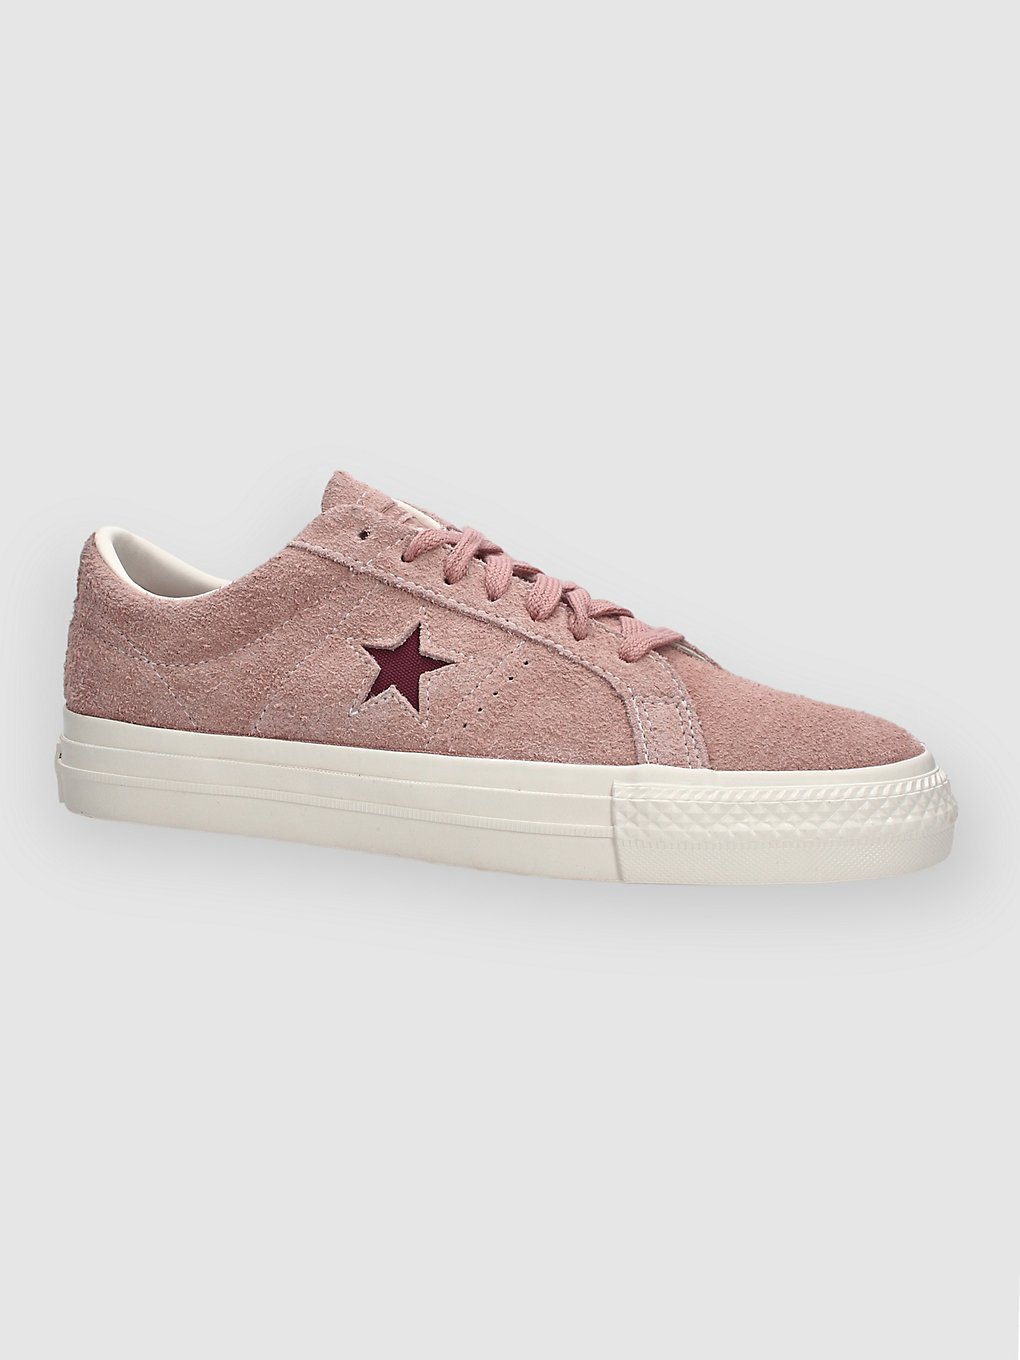 Converse One Star Pro Vintage Suede Skate Shoes cherry vision kaufen